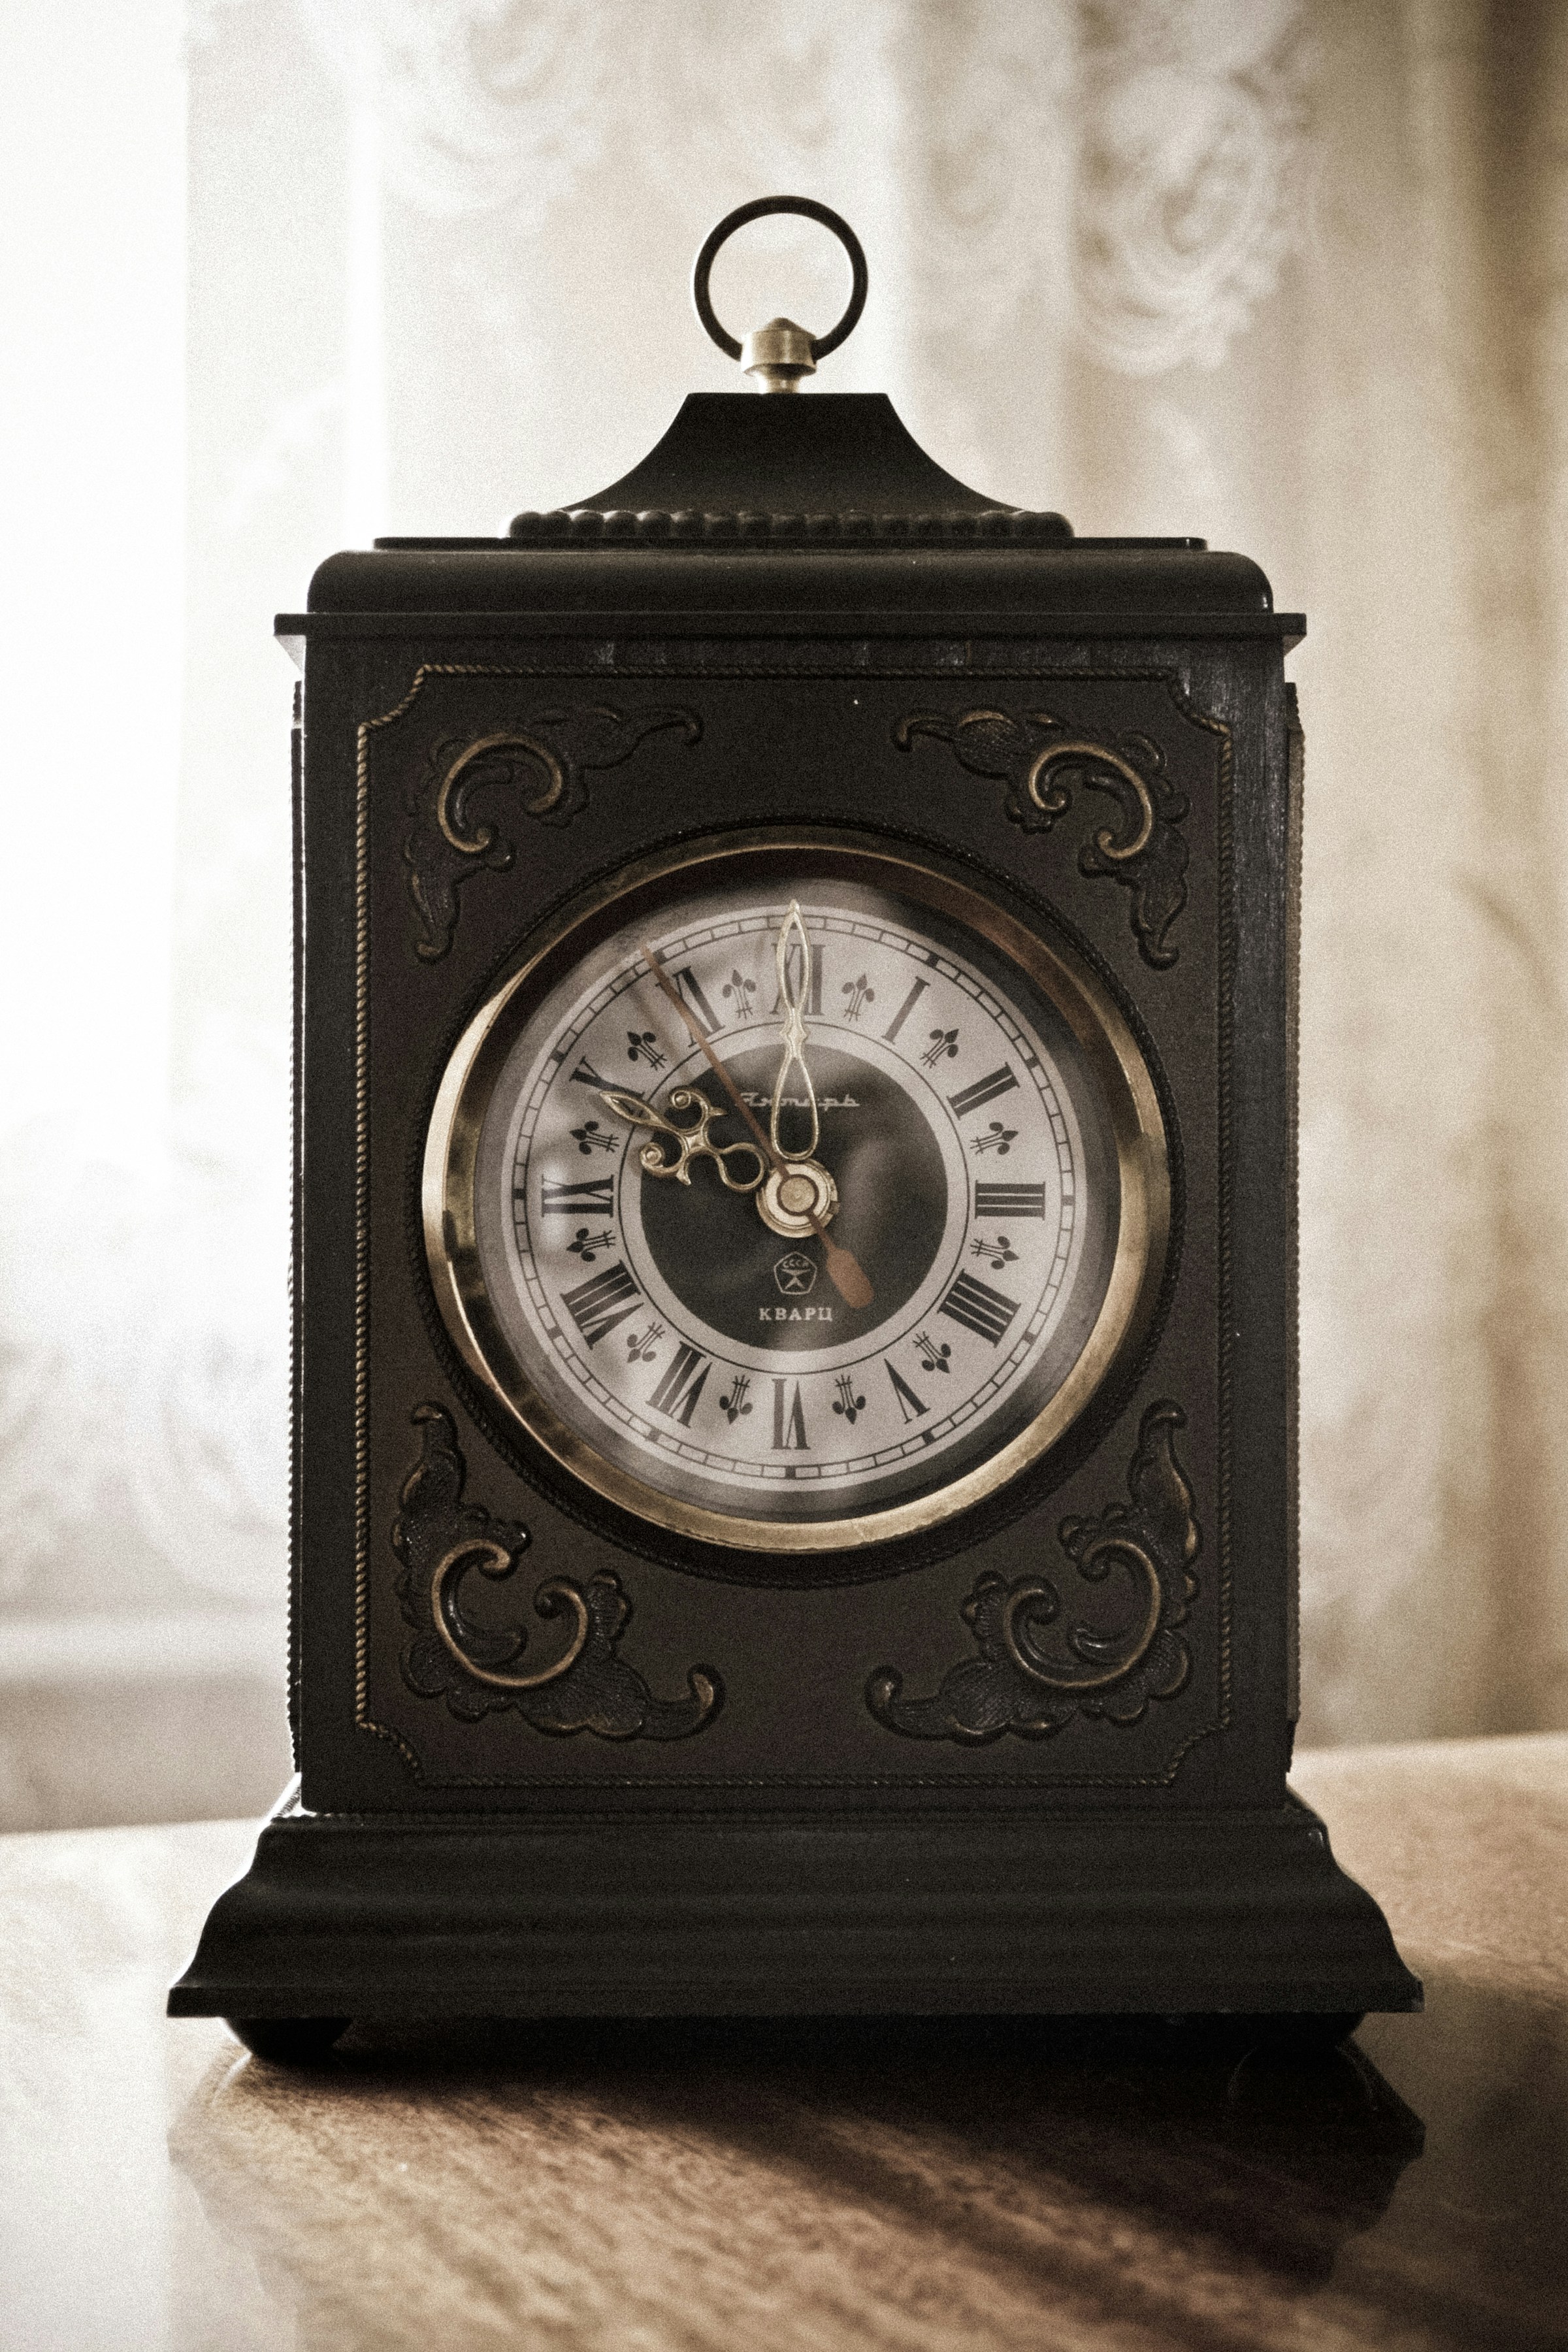 Clock standing on a surface | Source: Unsplash